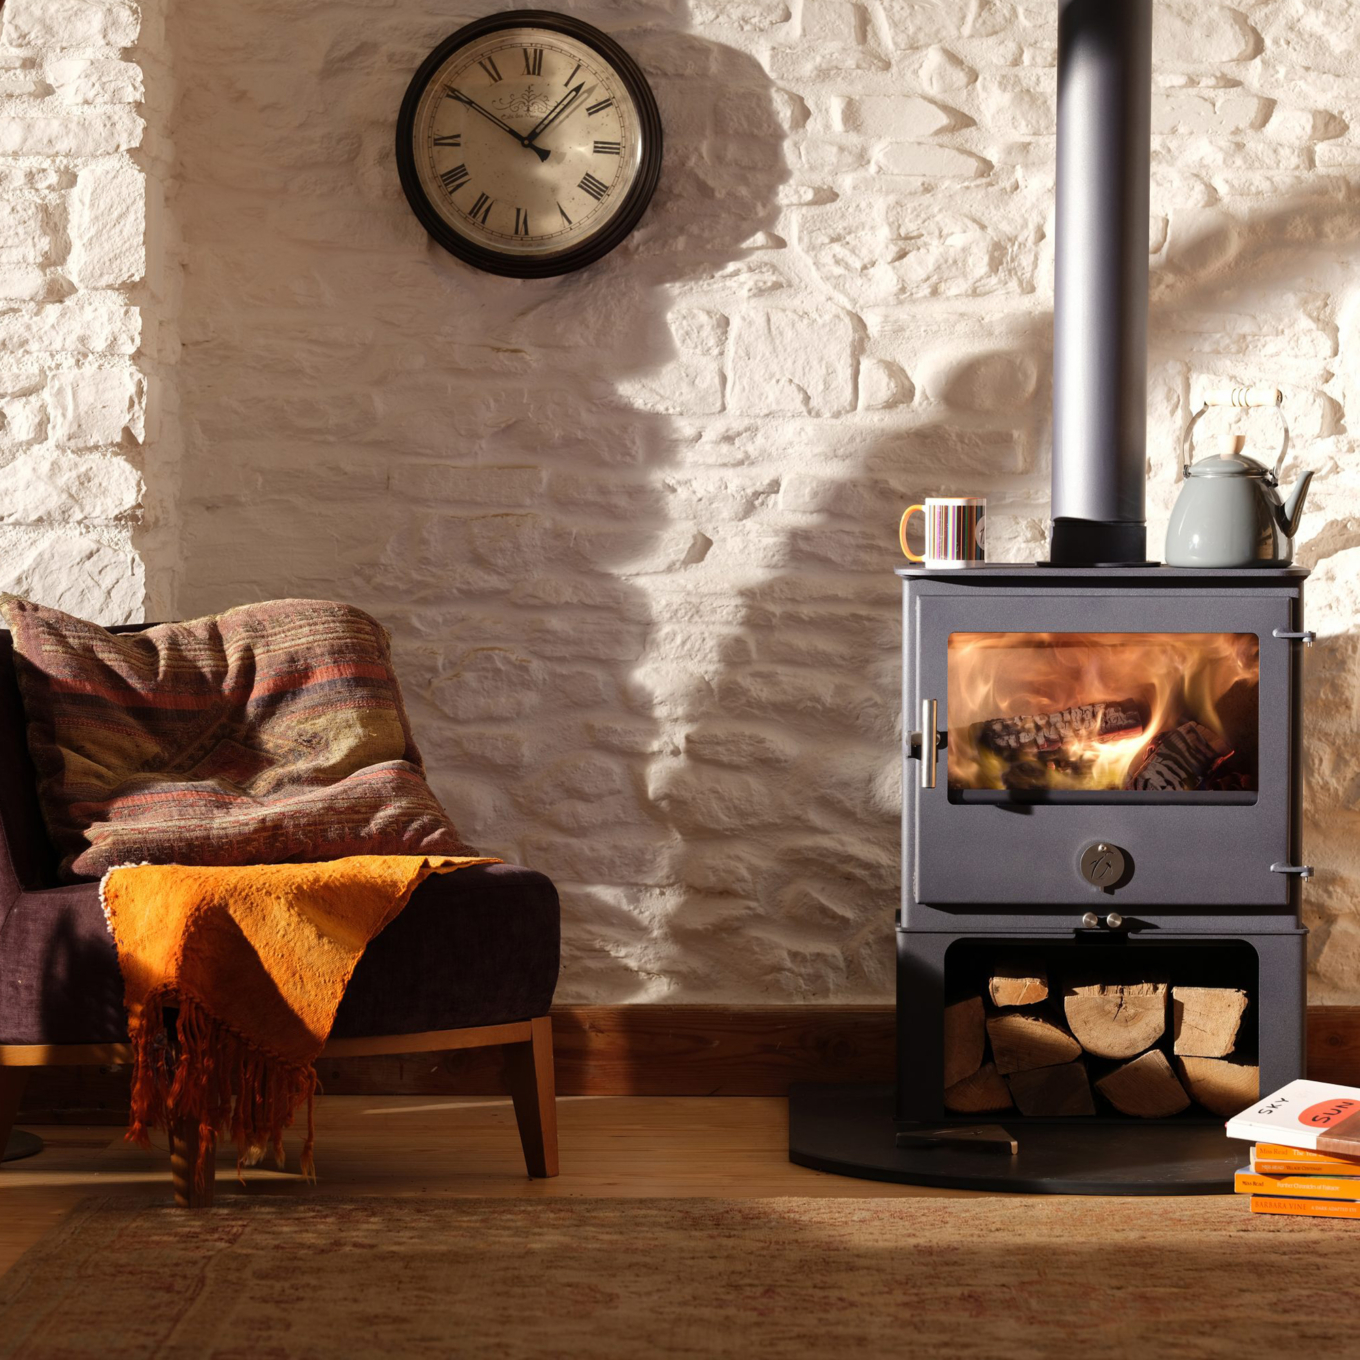 5 wood burning stove accessories every home should have